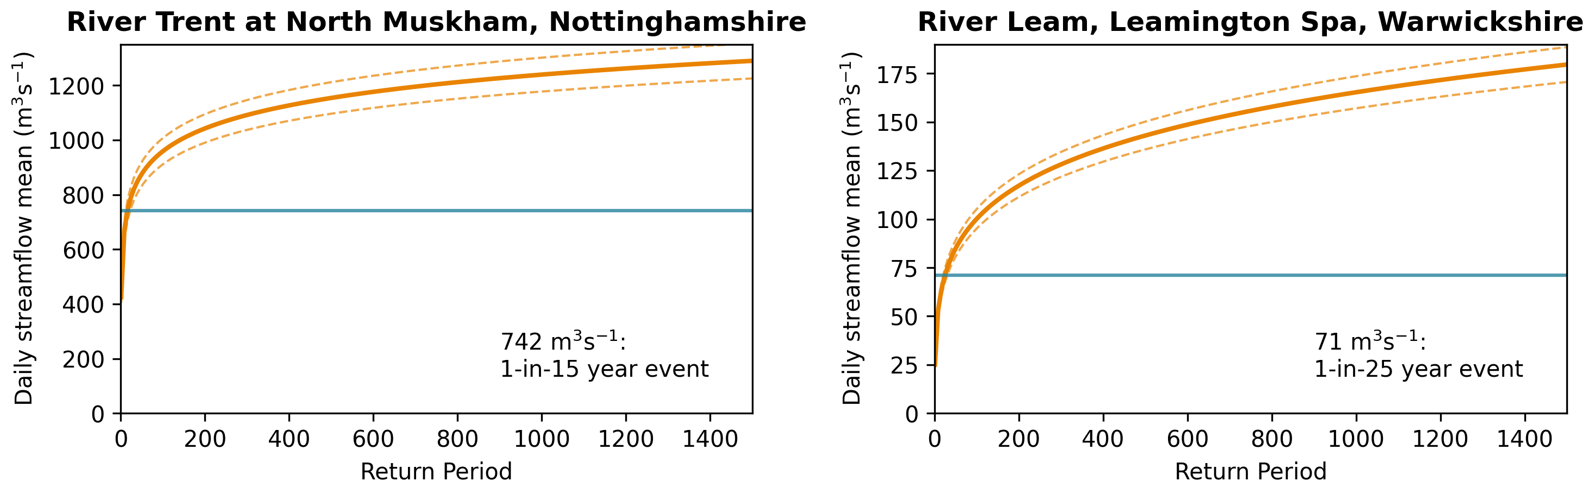 Return period graph of Nottinghamshire and Warwickshire